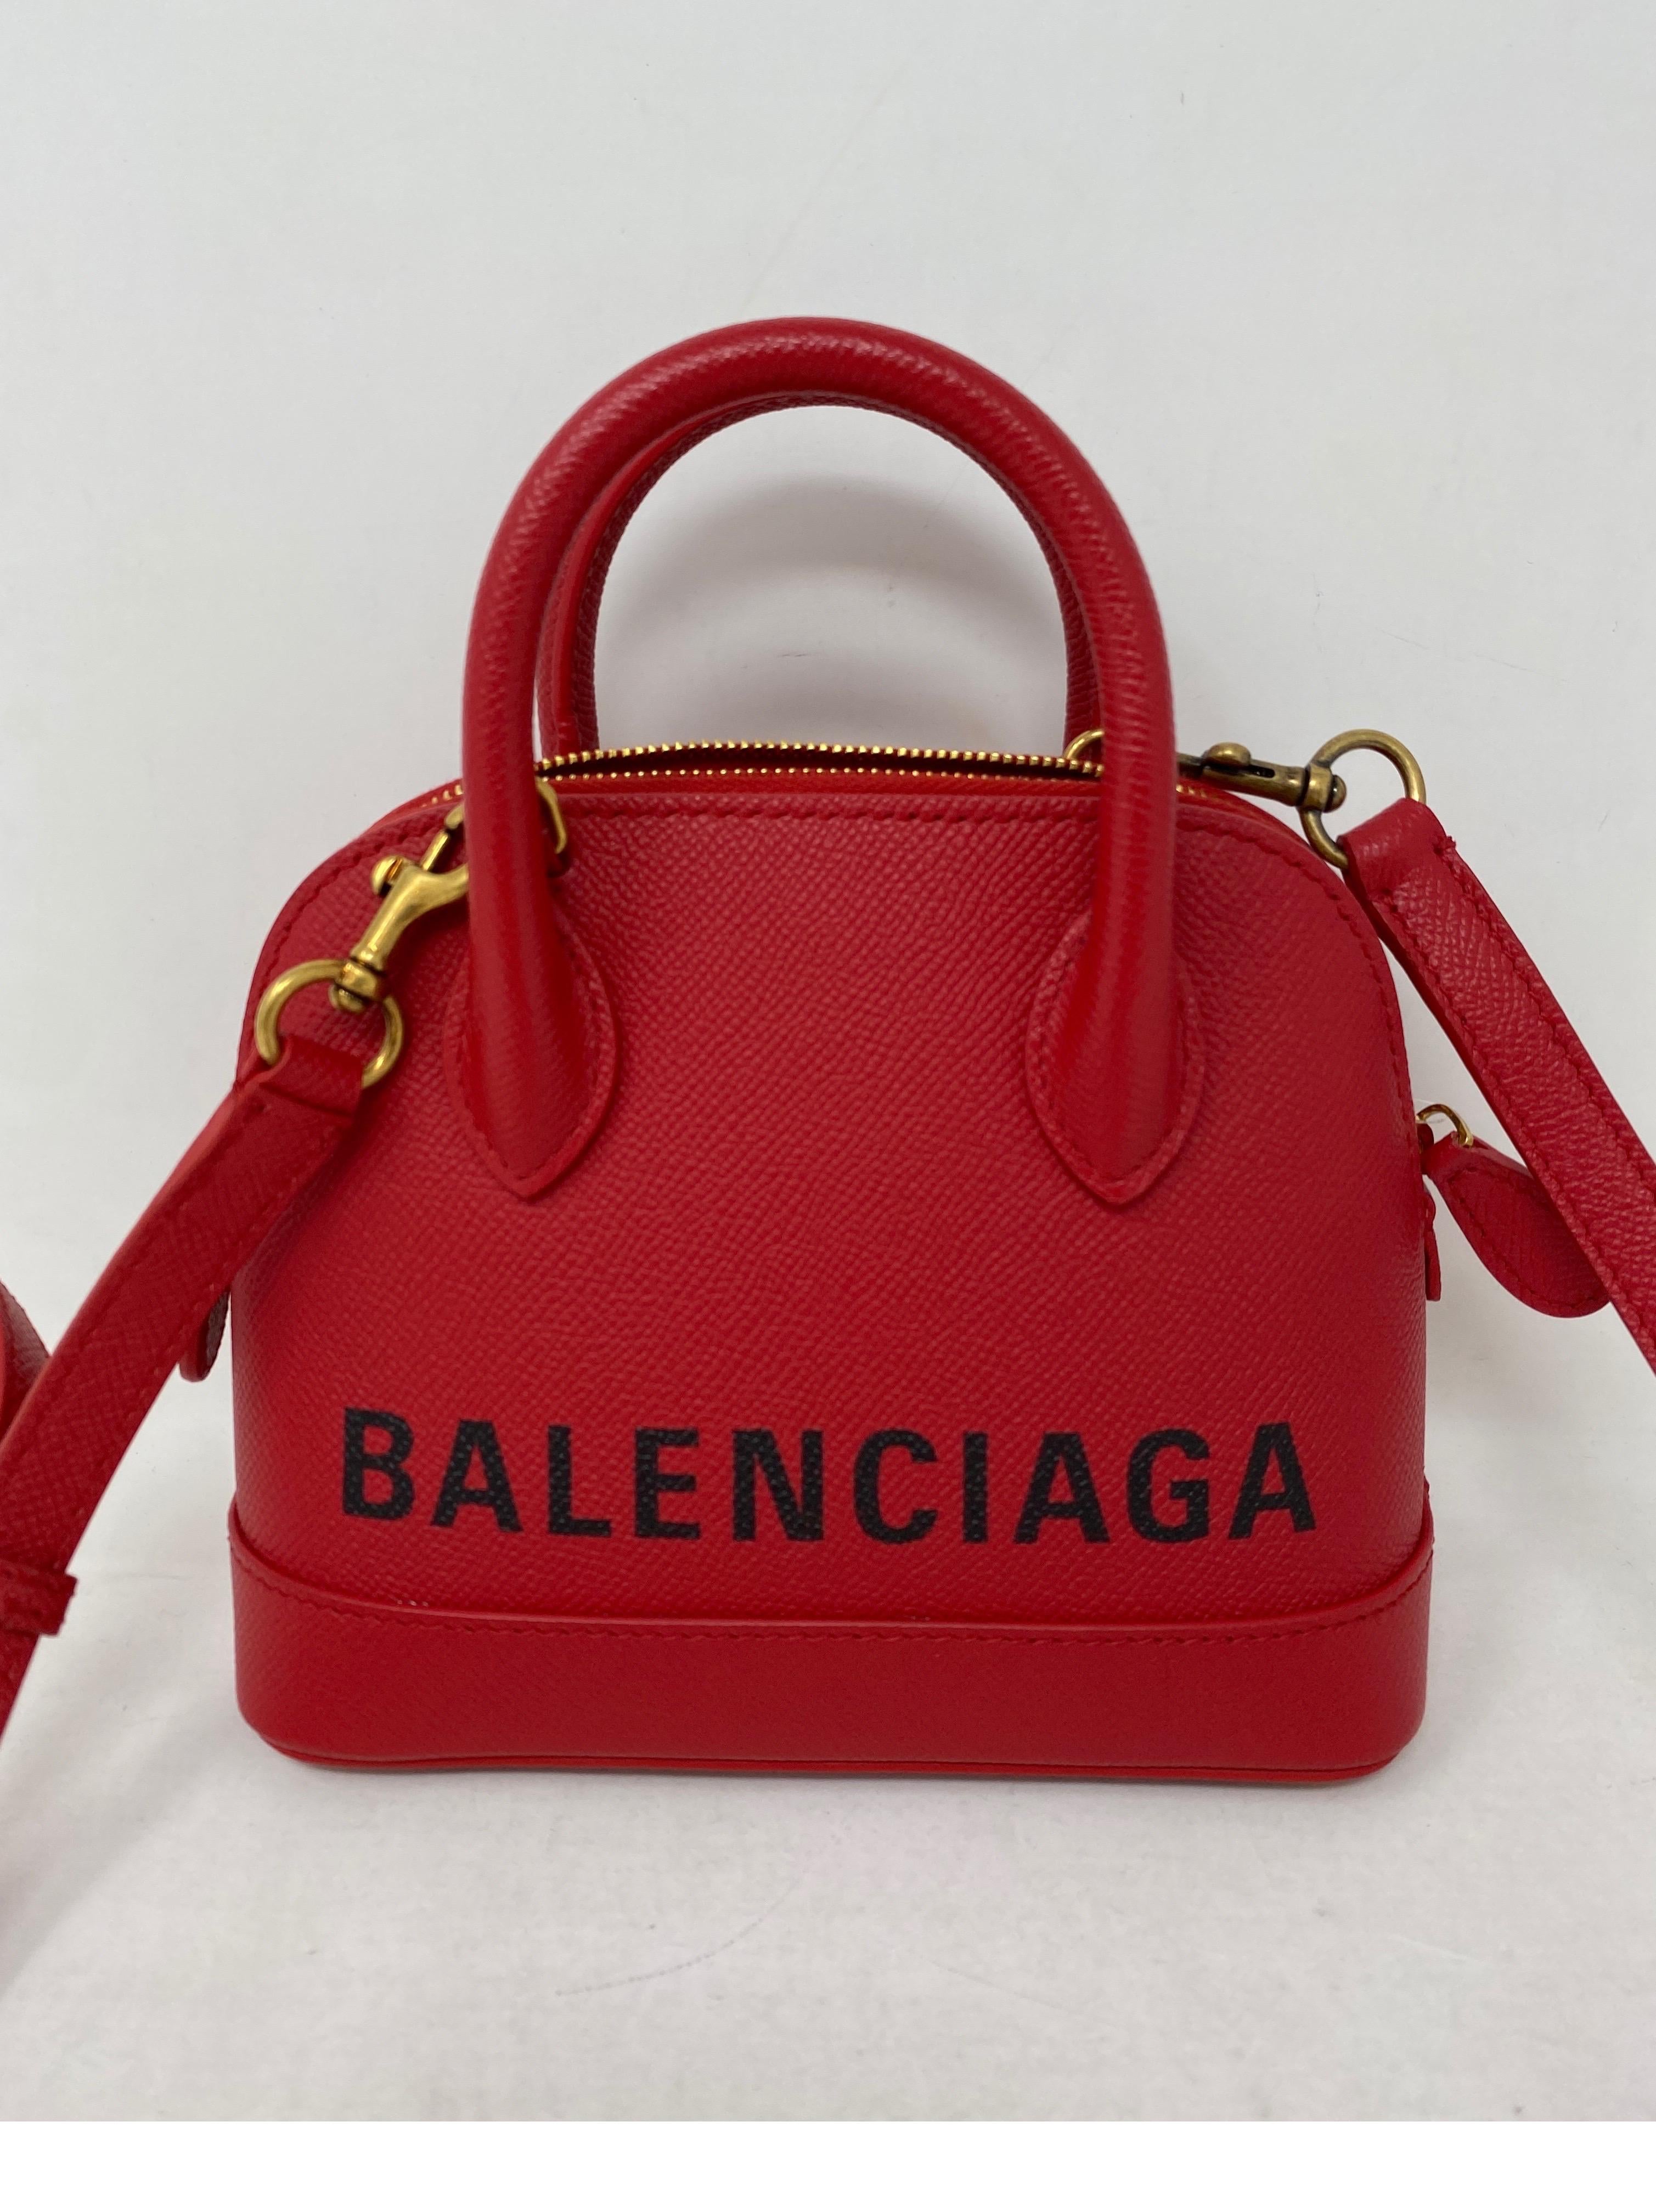 Red and Black Balenciaga Mini Bag. Crossbody or top handle mini bag. Mint like new condition. Very cute style bag. All leather. Includes dust cover. Guaranteed authentic. 